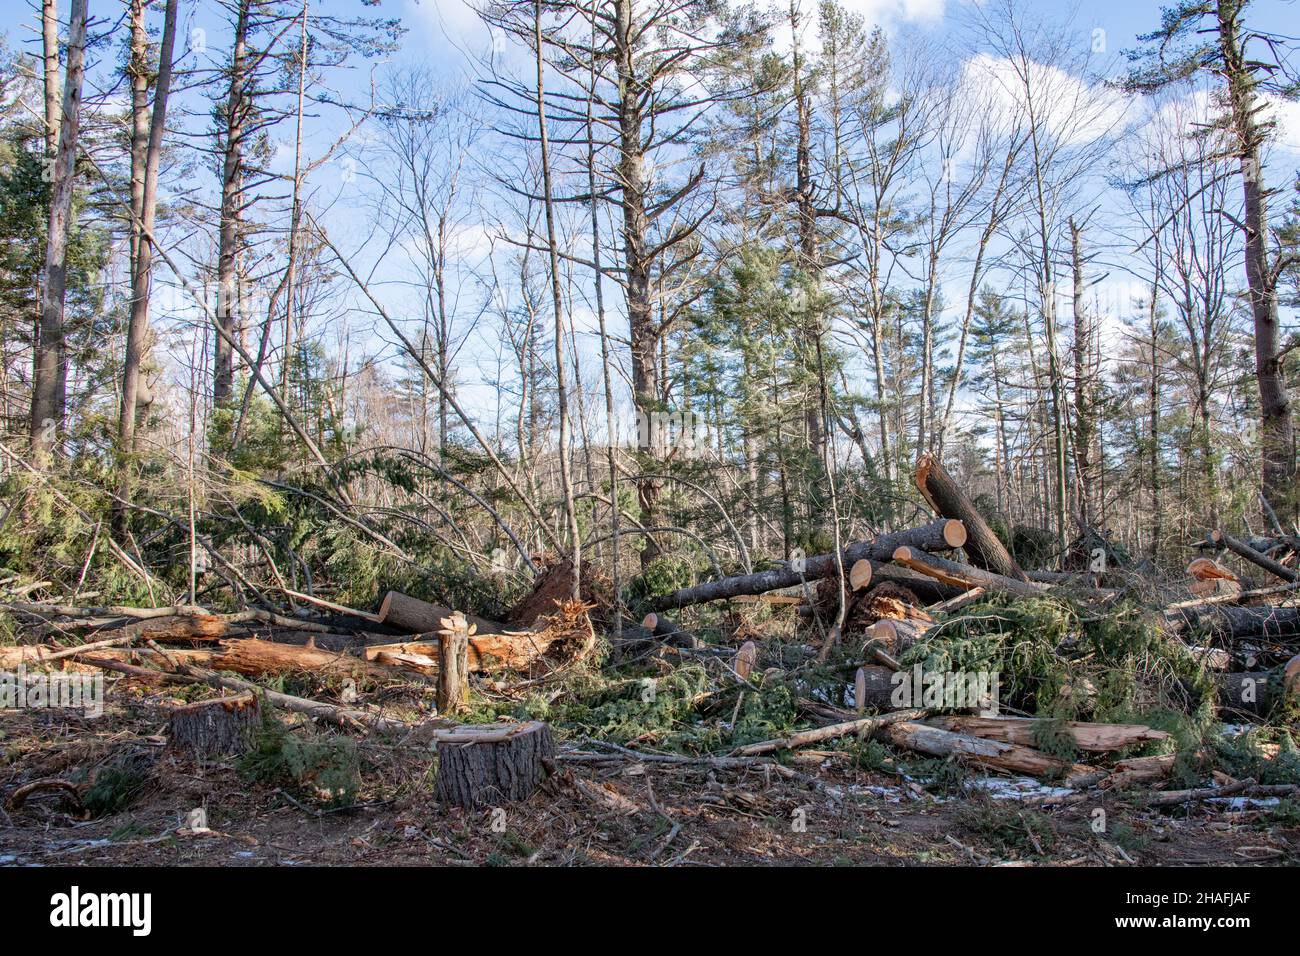 Storm damage and destruction to a forest in Speculator, NY USA from high winds or a tornado in early winter Stock Photo